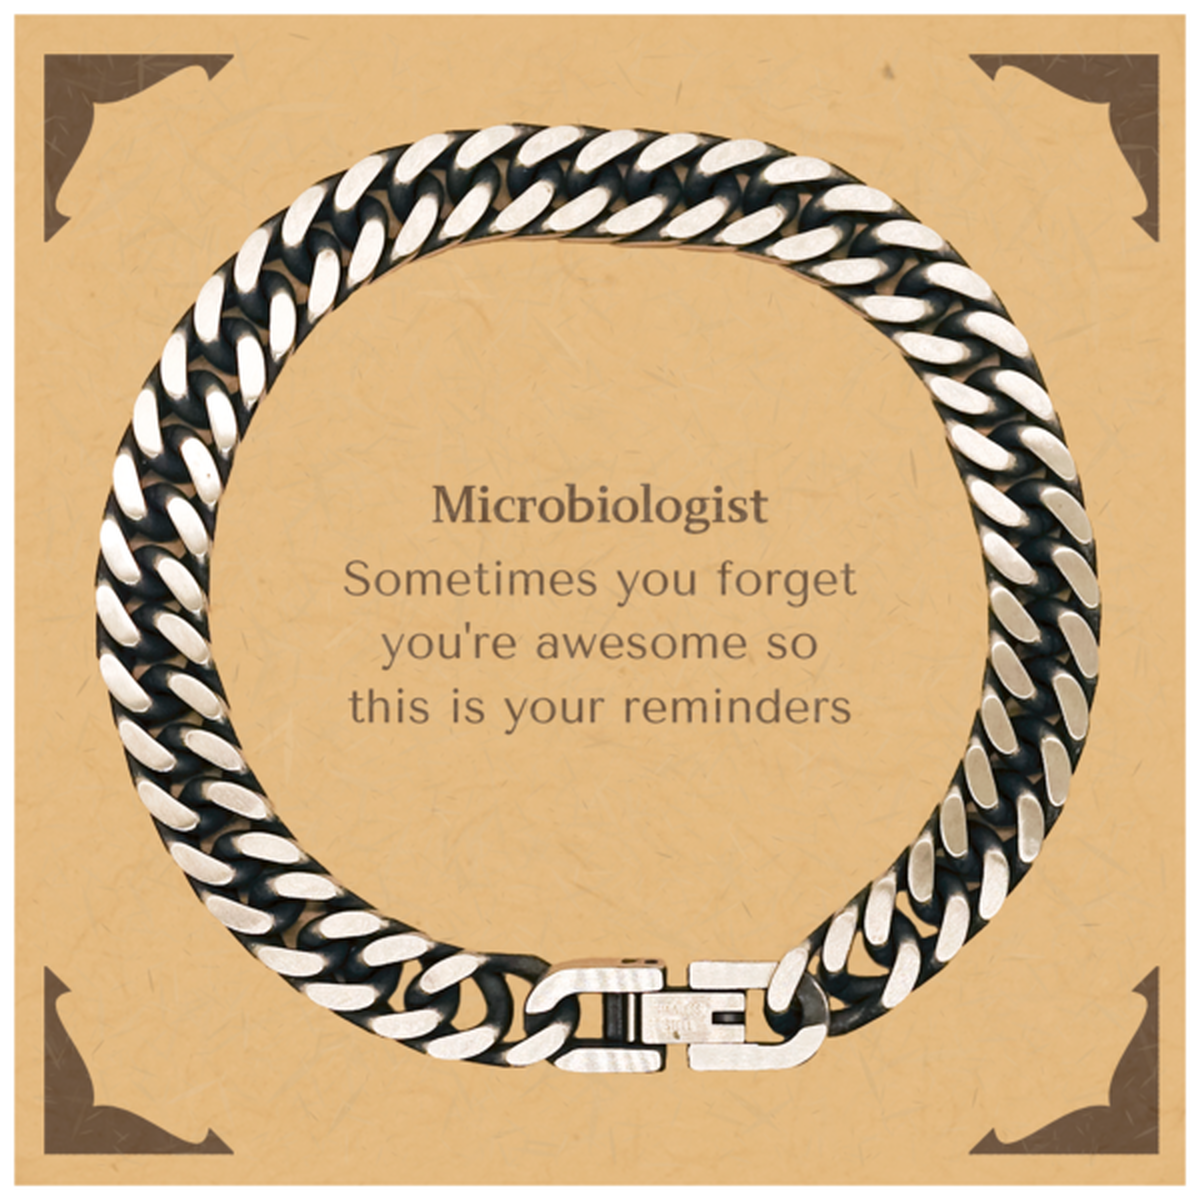 Sentimental Microbiologist Cuban Link Chain Bracelet, Microbiologist Sometimes you forget you're awesome so this is your reminders, Graduation Christmas Birthday Gifts for Microbiologist, Men, Women, Coworkers